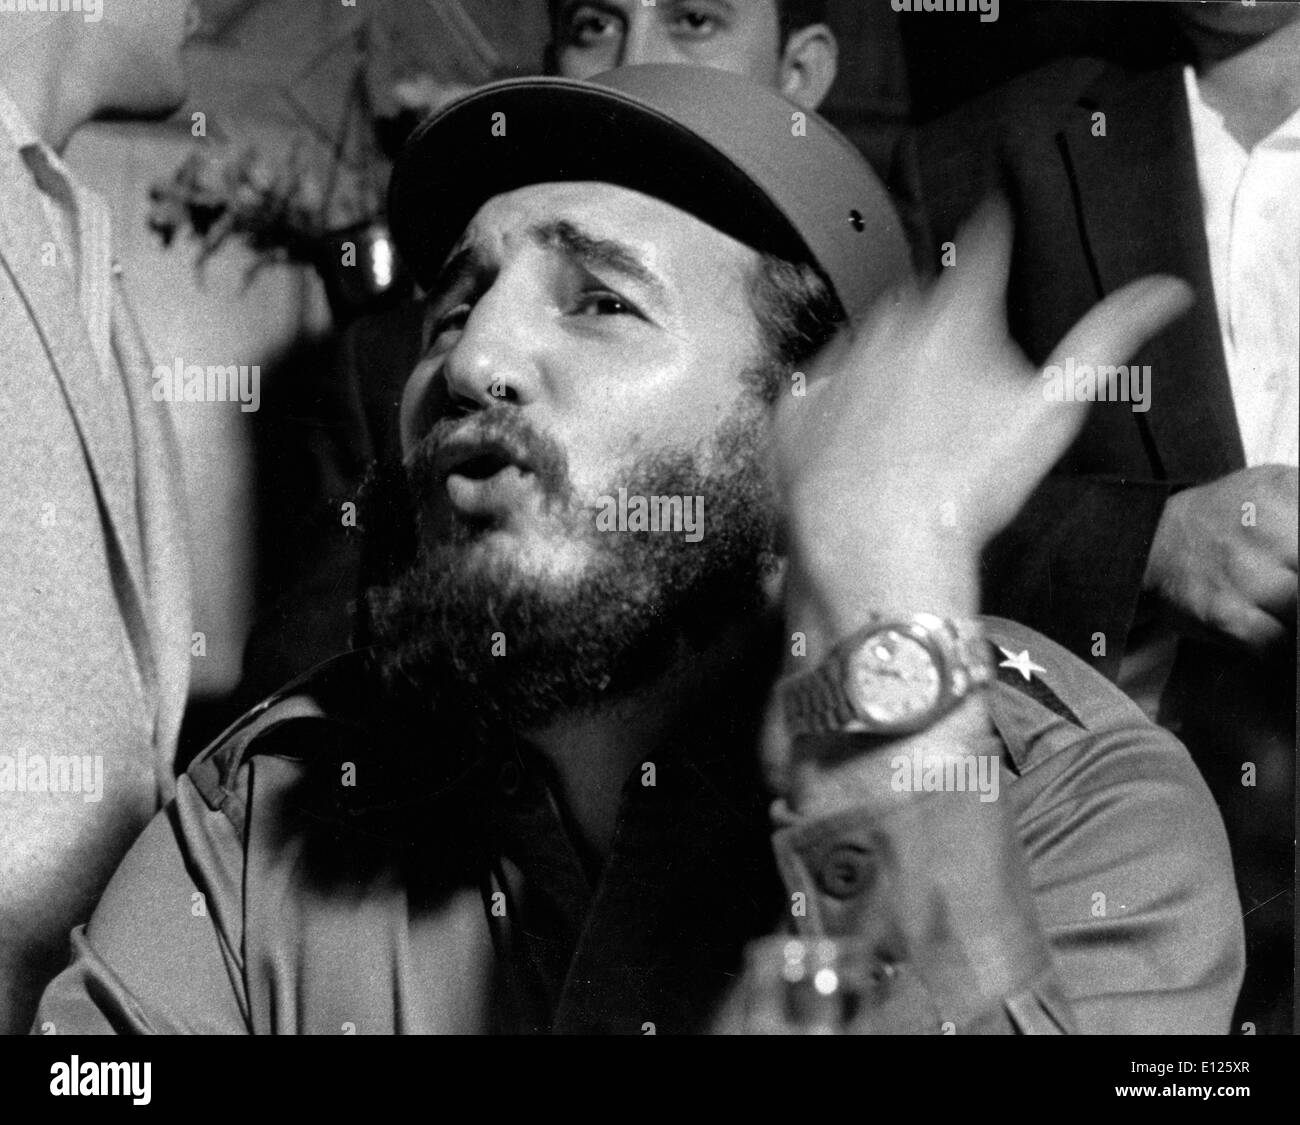 May 03, 2006; Havana, Cuba; (File Photo: Exact Place and Date Unknown) FIDEL ALEJANDRO CASTRO RUIZ (born August 13, 1926) has been the ruler of Cuba since 1959, when, leading the 26th of July Movement, he overthrew the regime of Fulgencio Batista. In the years that followed he oversaw the transformation of Cuba into the first Communist state in the Western Hemisphere.. (Credit Image: KEYSTONE Pictures USA/ZUMAPRESS.com) Stock Photo